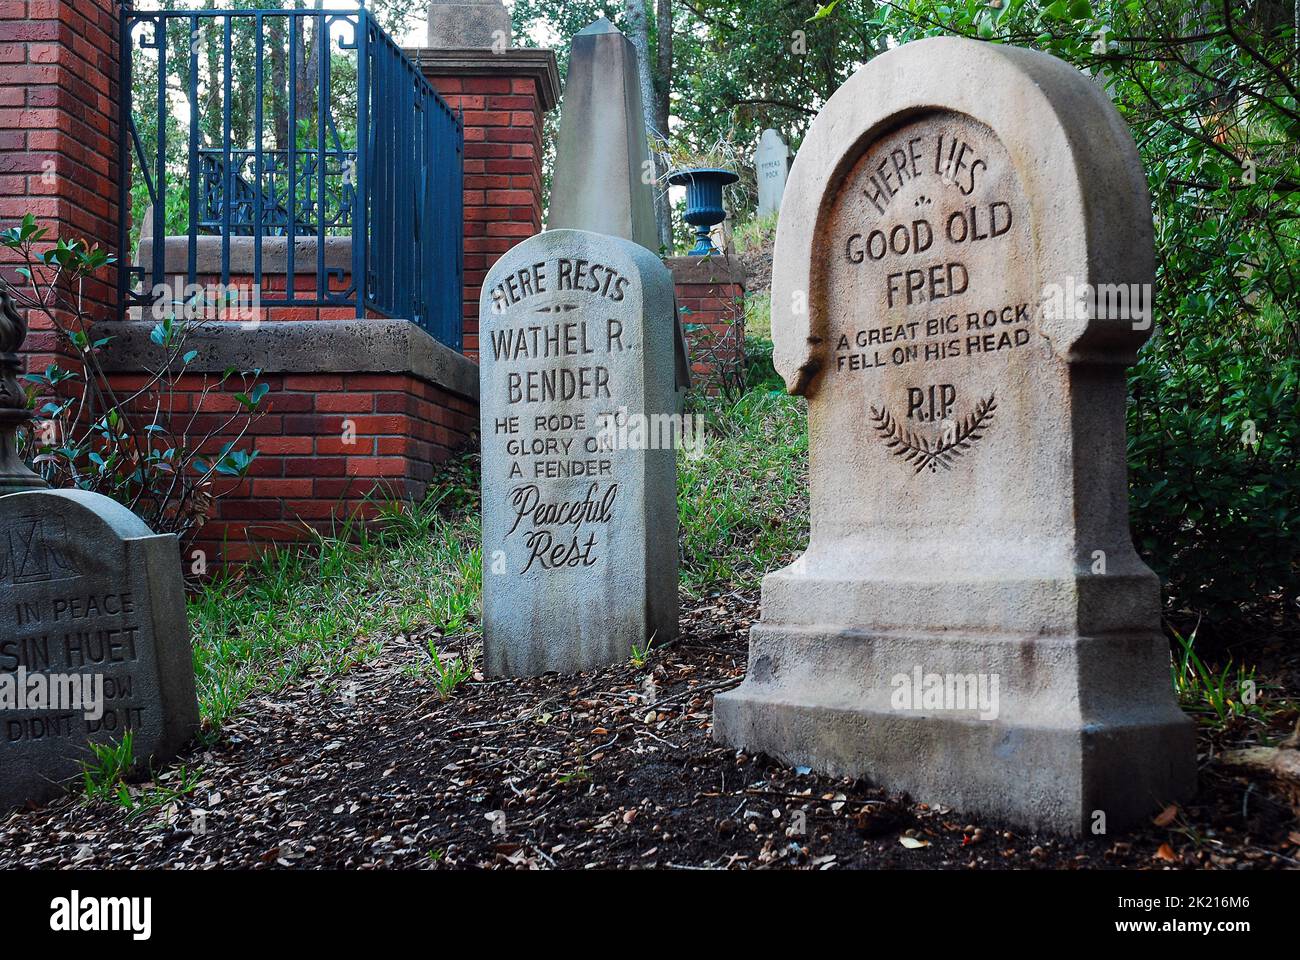 The Tombstones and graves in the fake cemetery outside of the Disney World Haunted Mansion attraction tells jokes and humorous tales Stock Photo